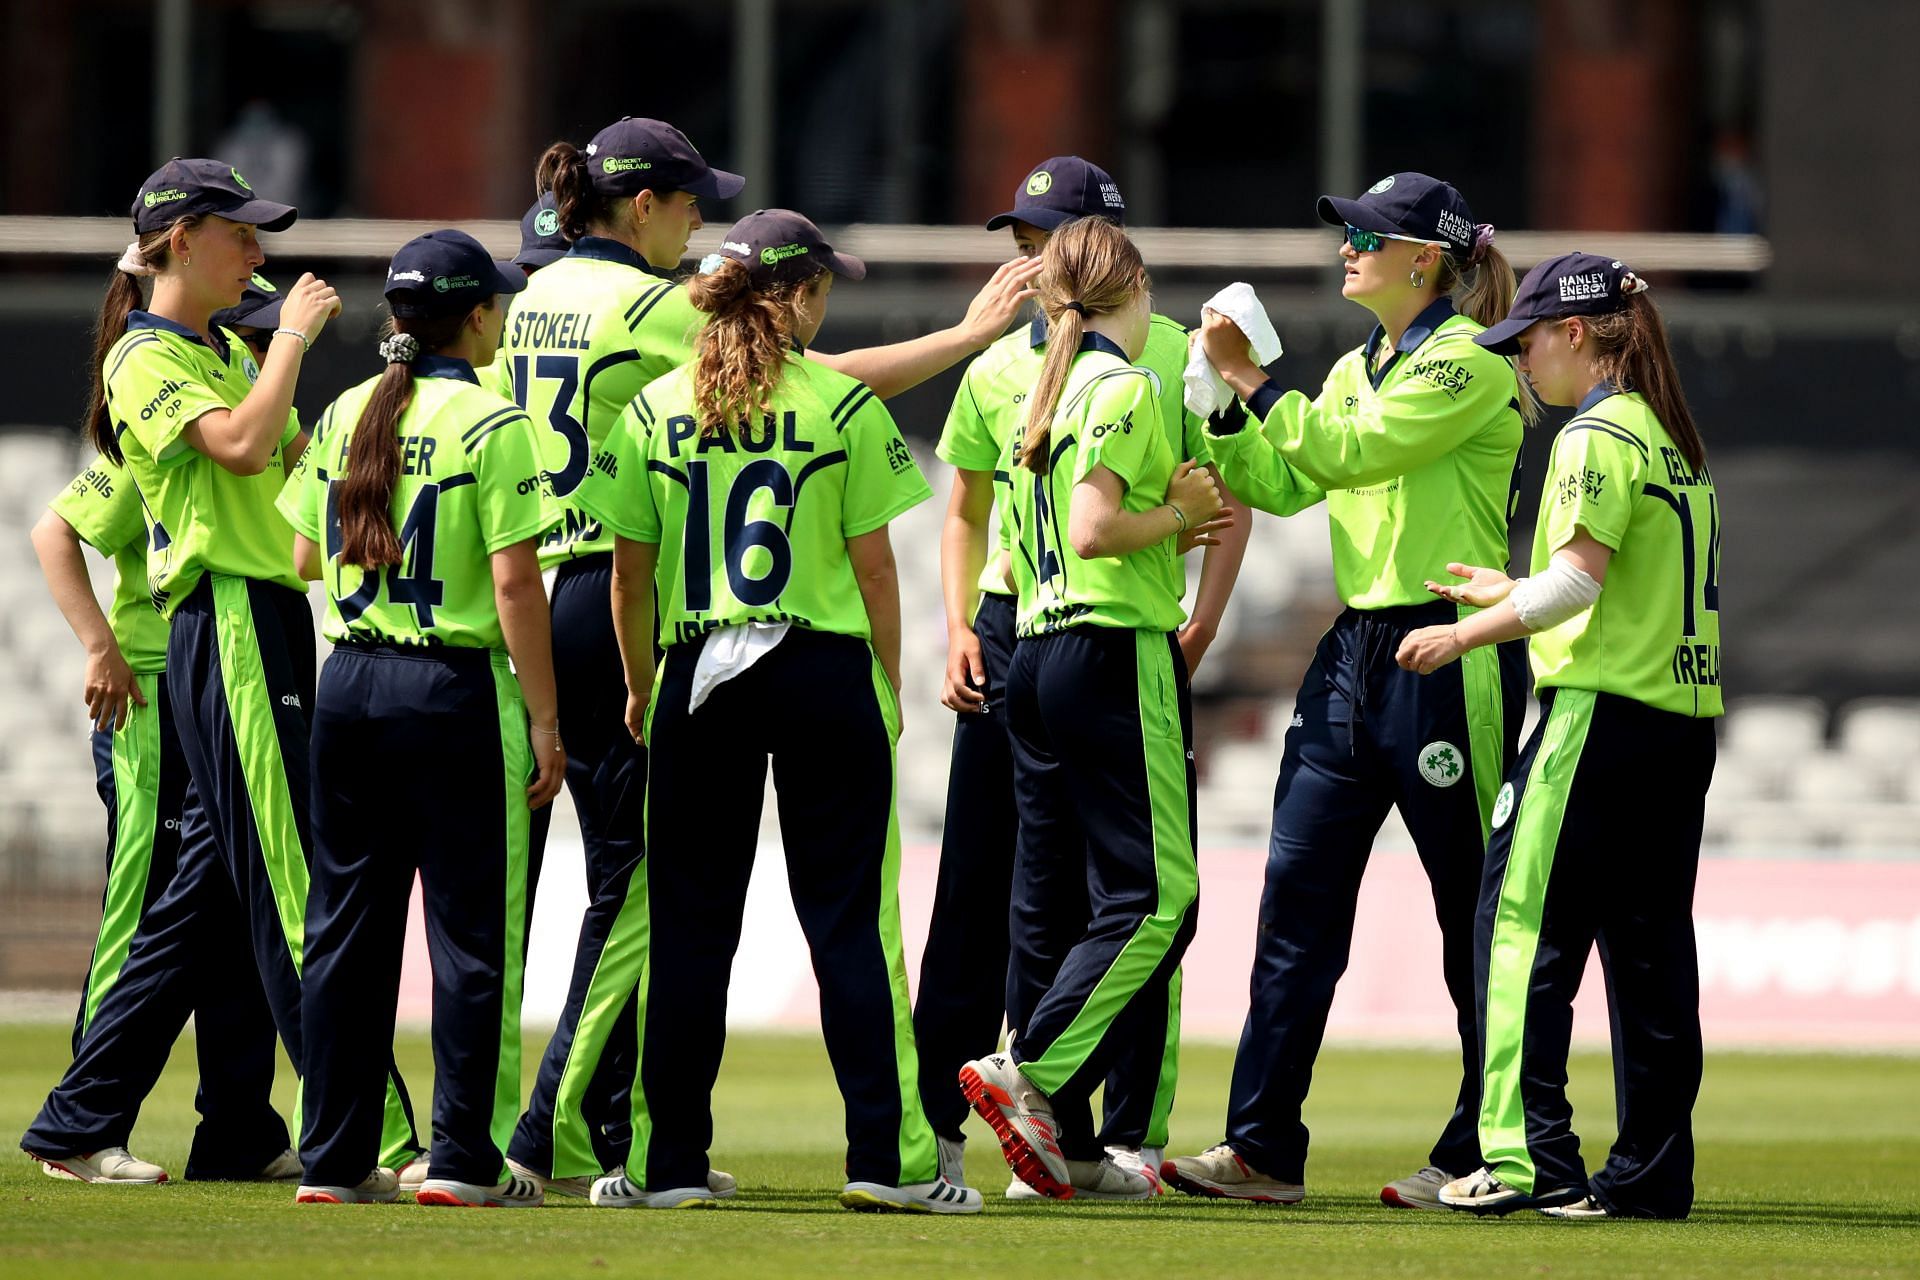 ECN Netherlands-Ireland T20IW 2023: Full schedule, squads, match timings, and live-streaming details